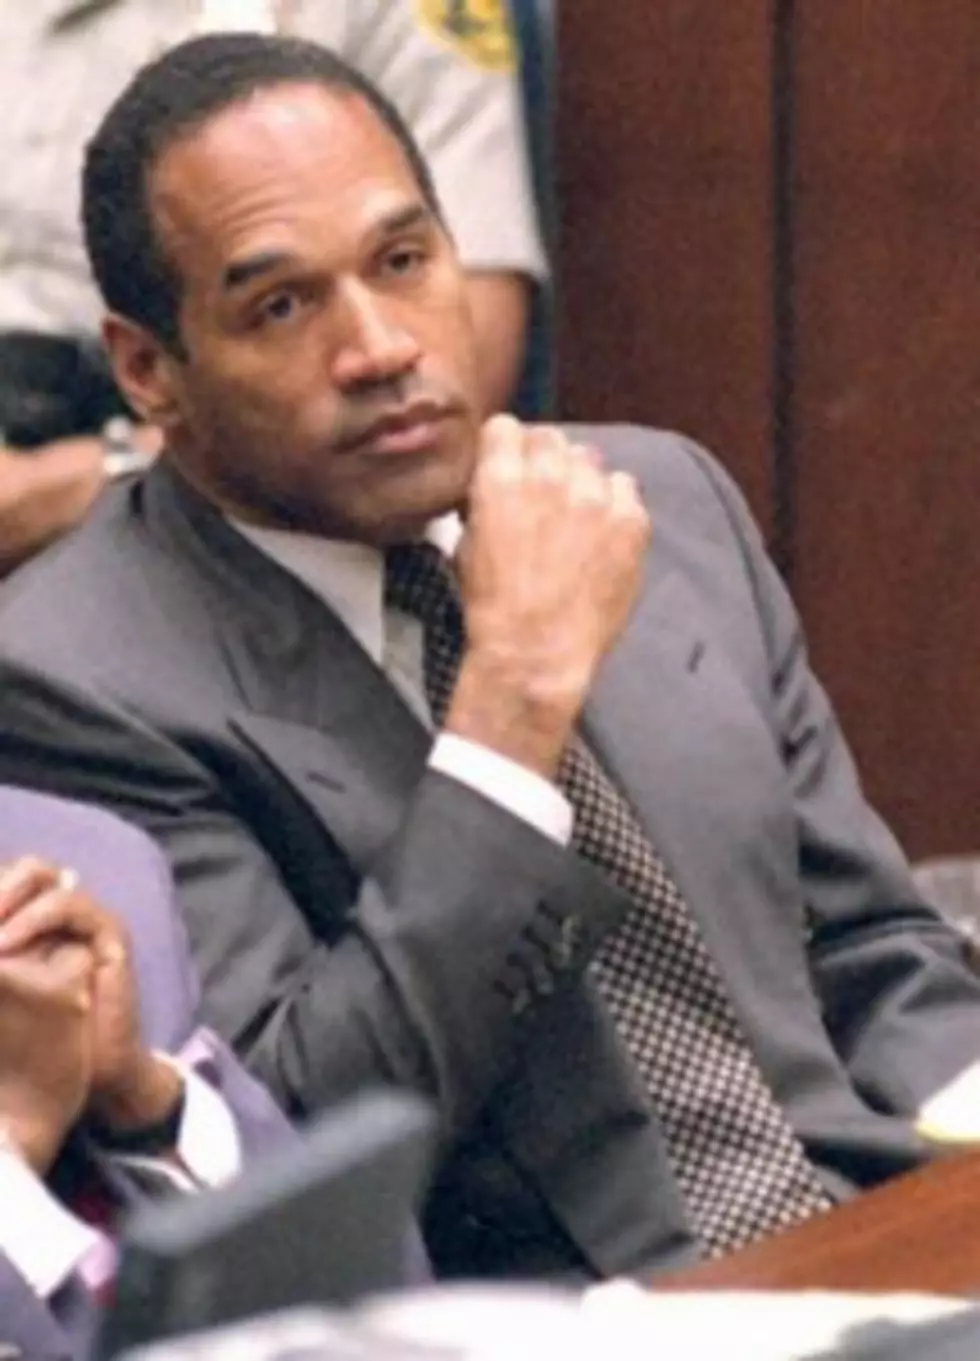 O.J. Simpson &#8216;Innocent&#8217; Verdict Came 21 Years Ago Today